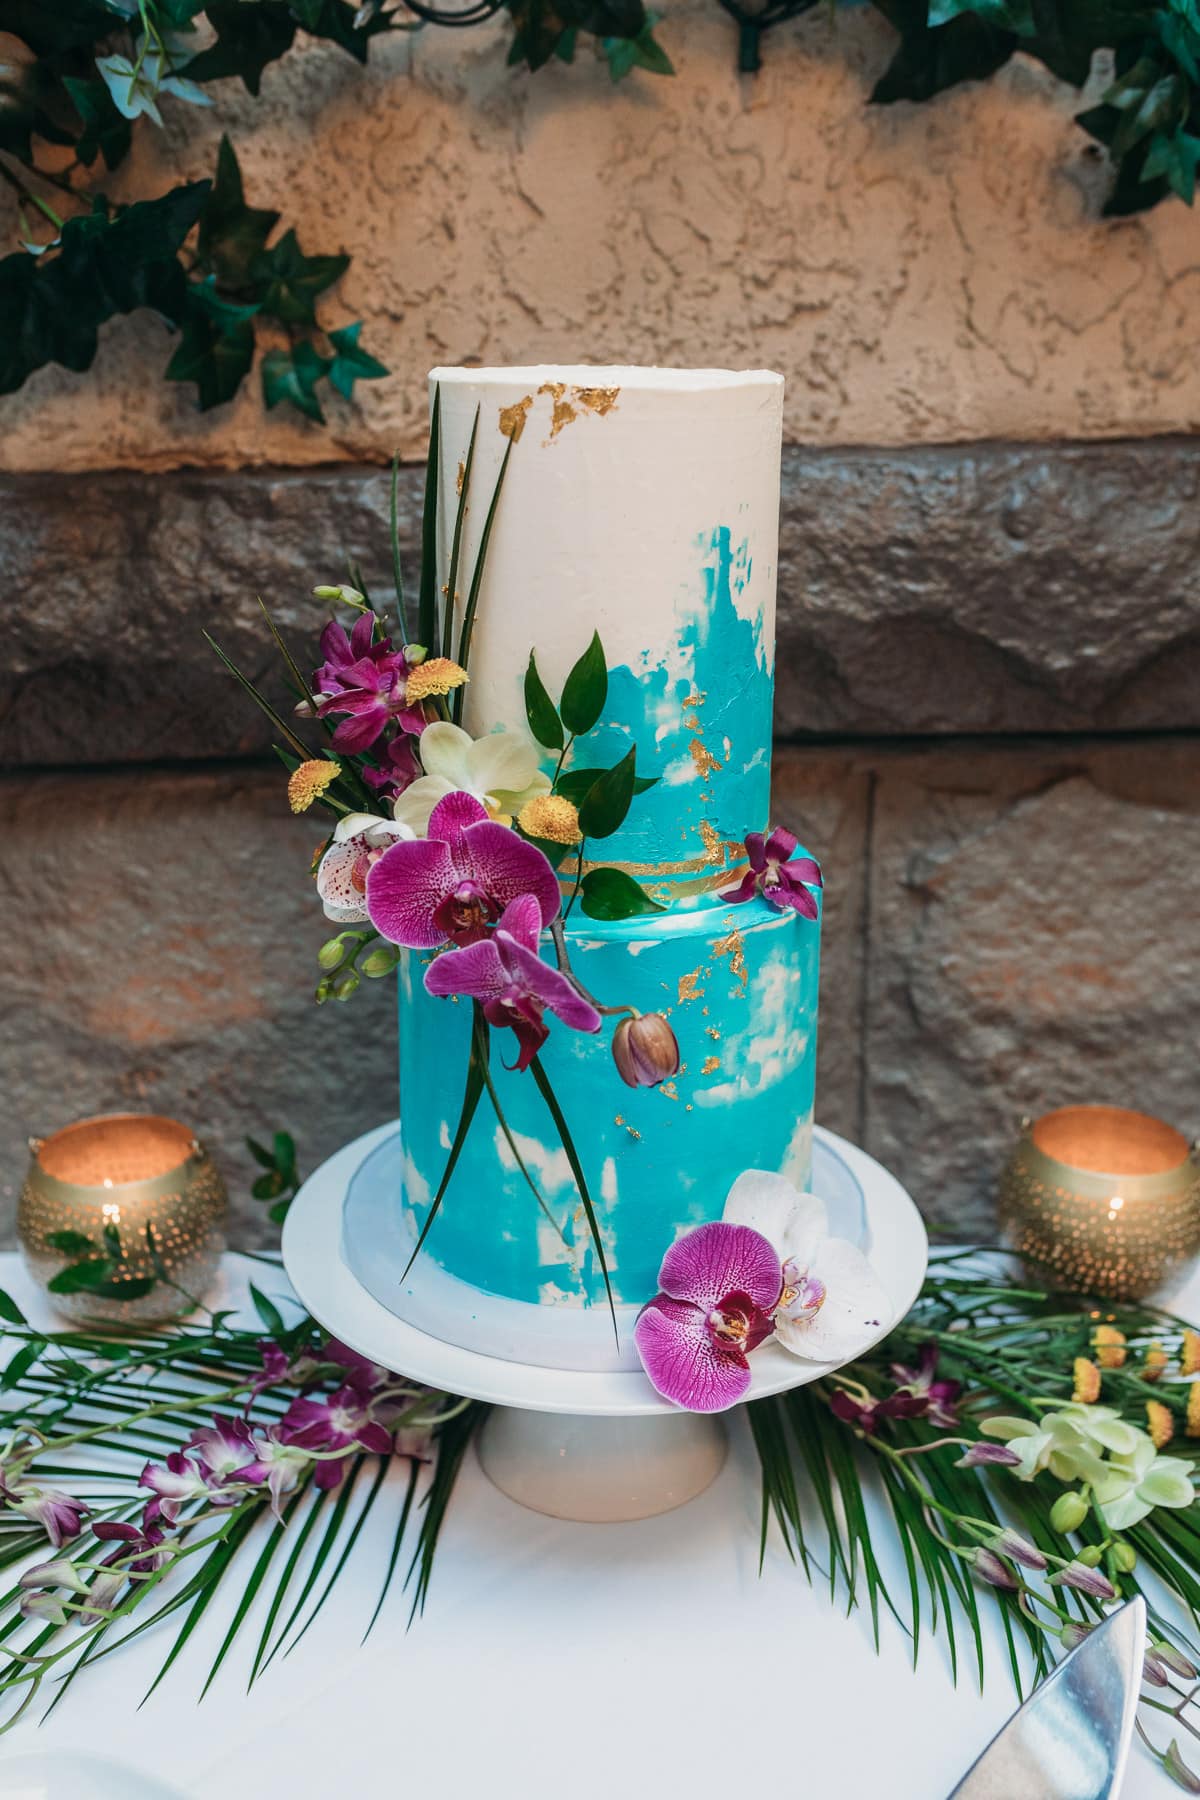 Alannah Peddie wedding cake from Frolic and Forage catering